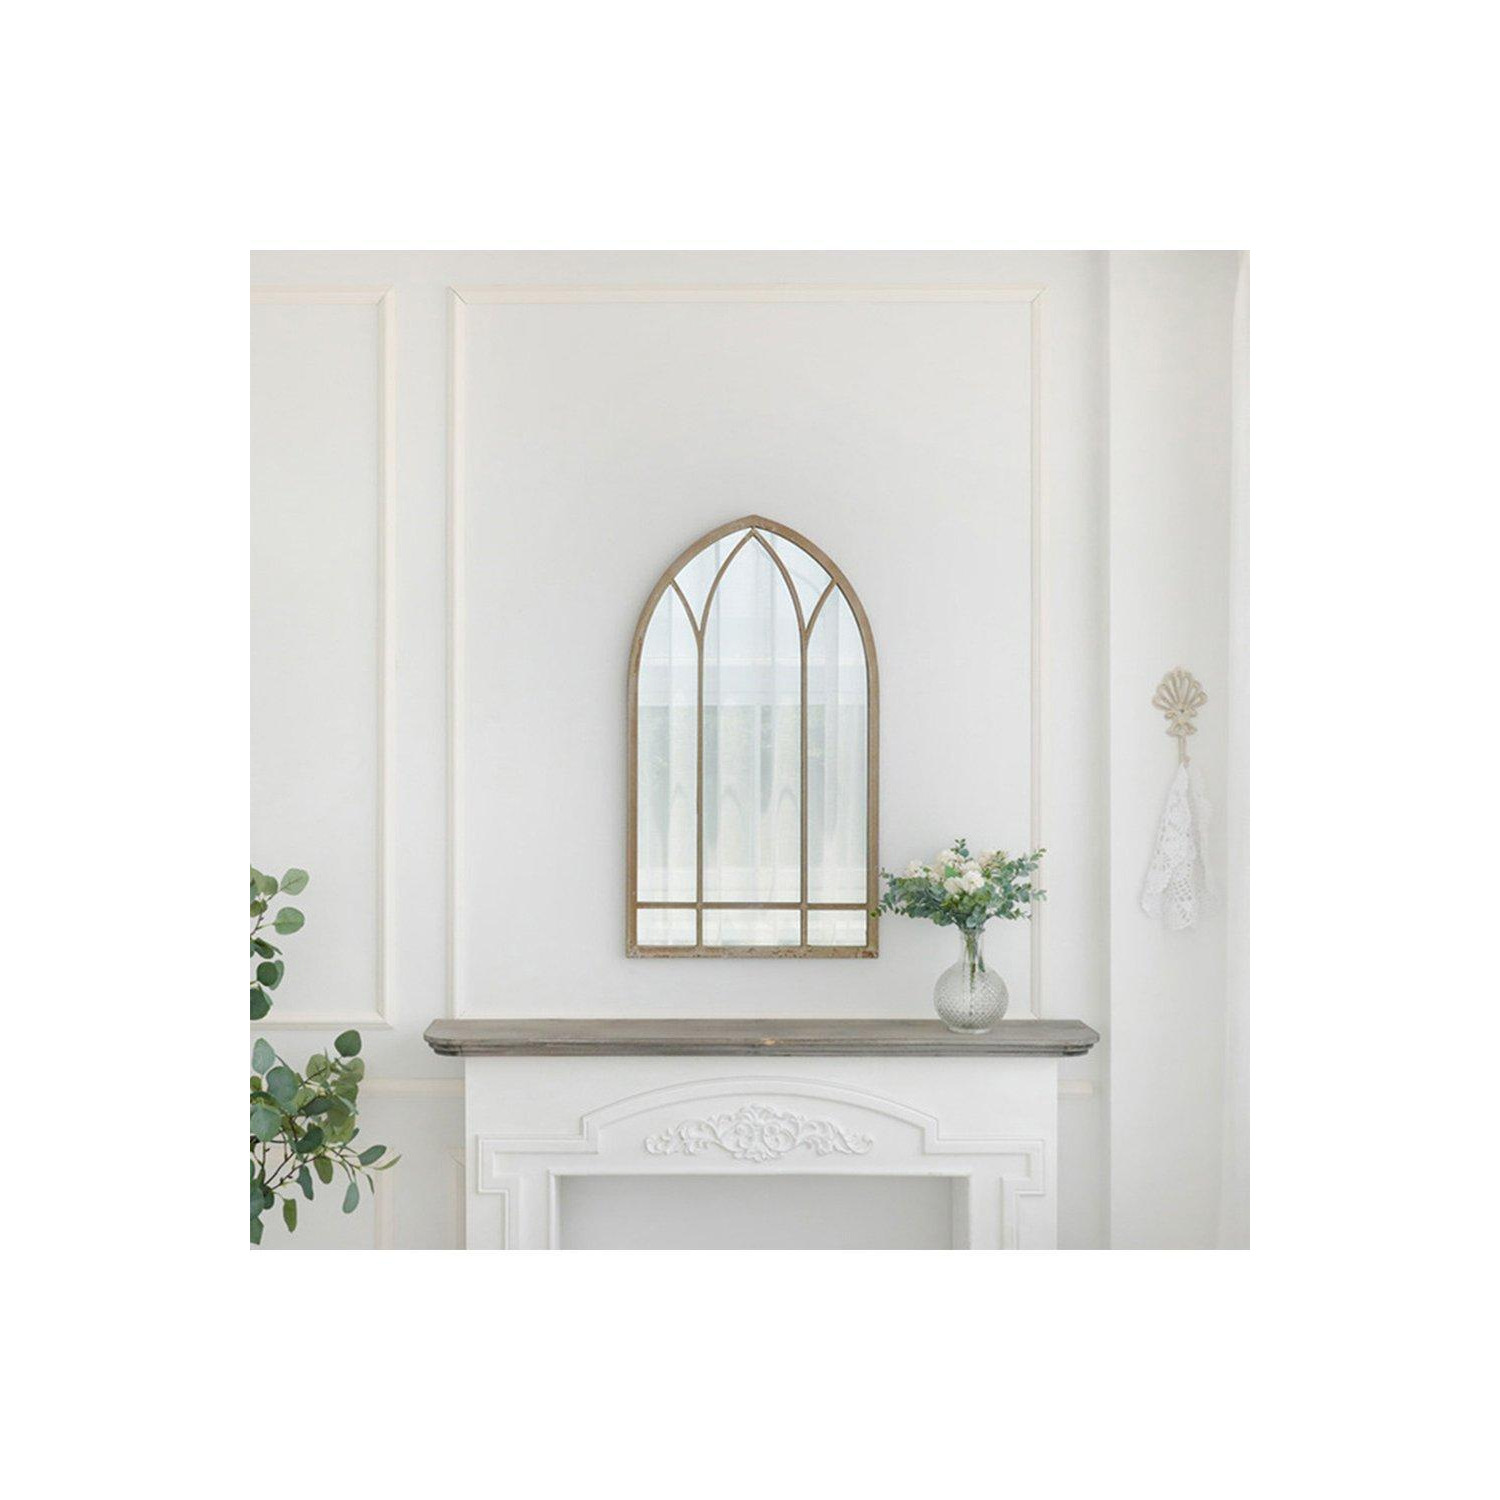 Arched Garden Decorative Window Mirror with Metal Frame - image 1